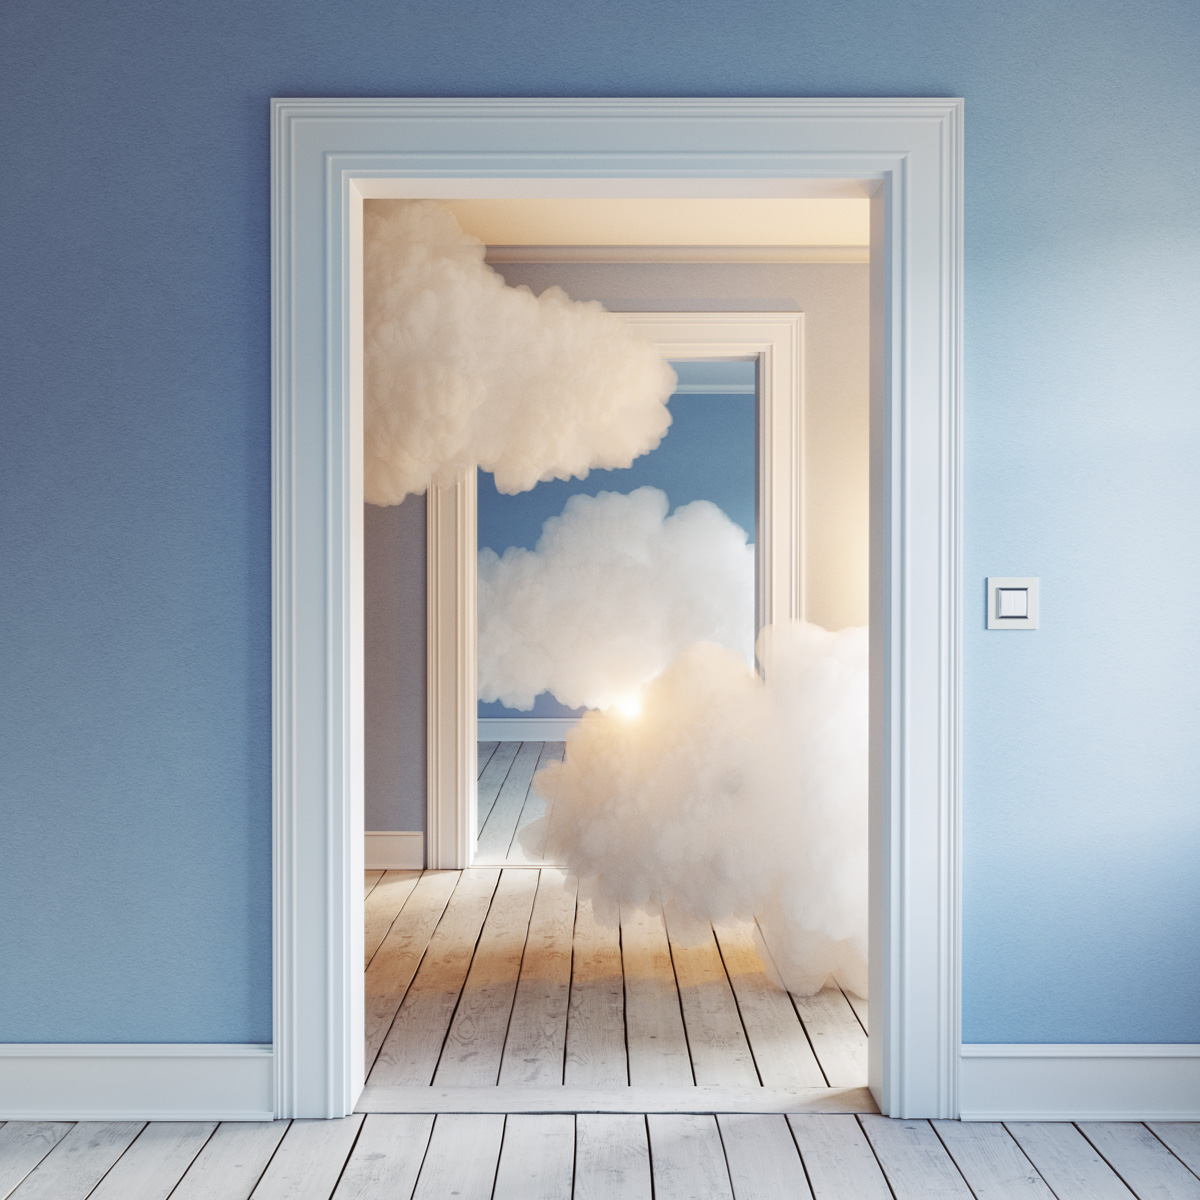 clouds in the room